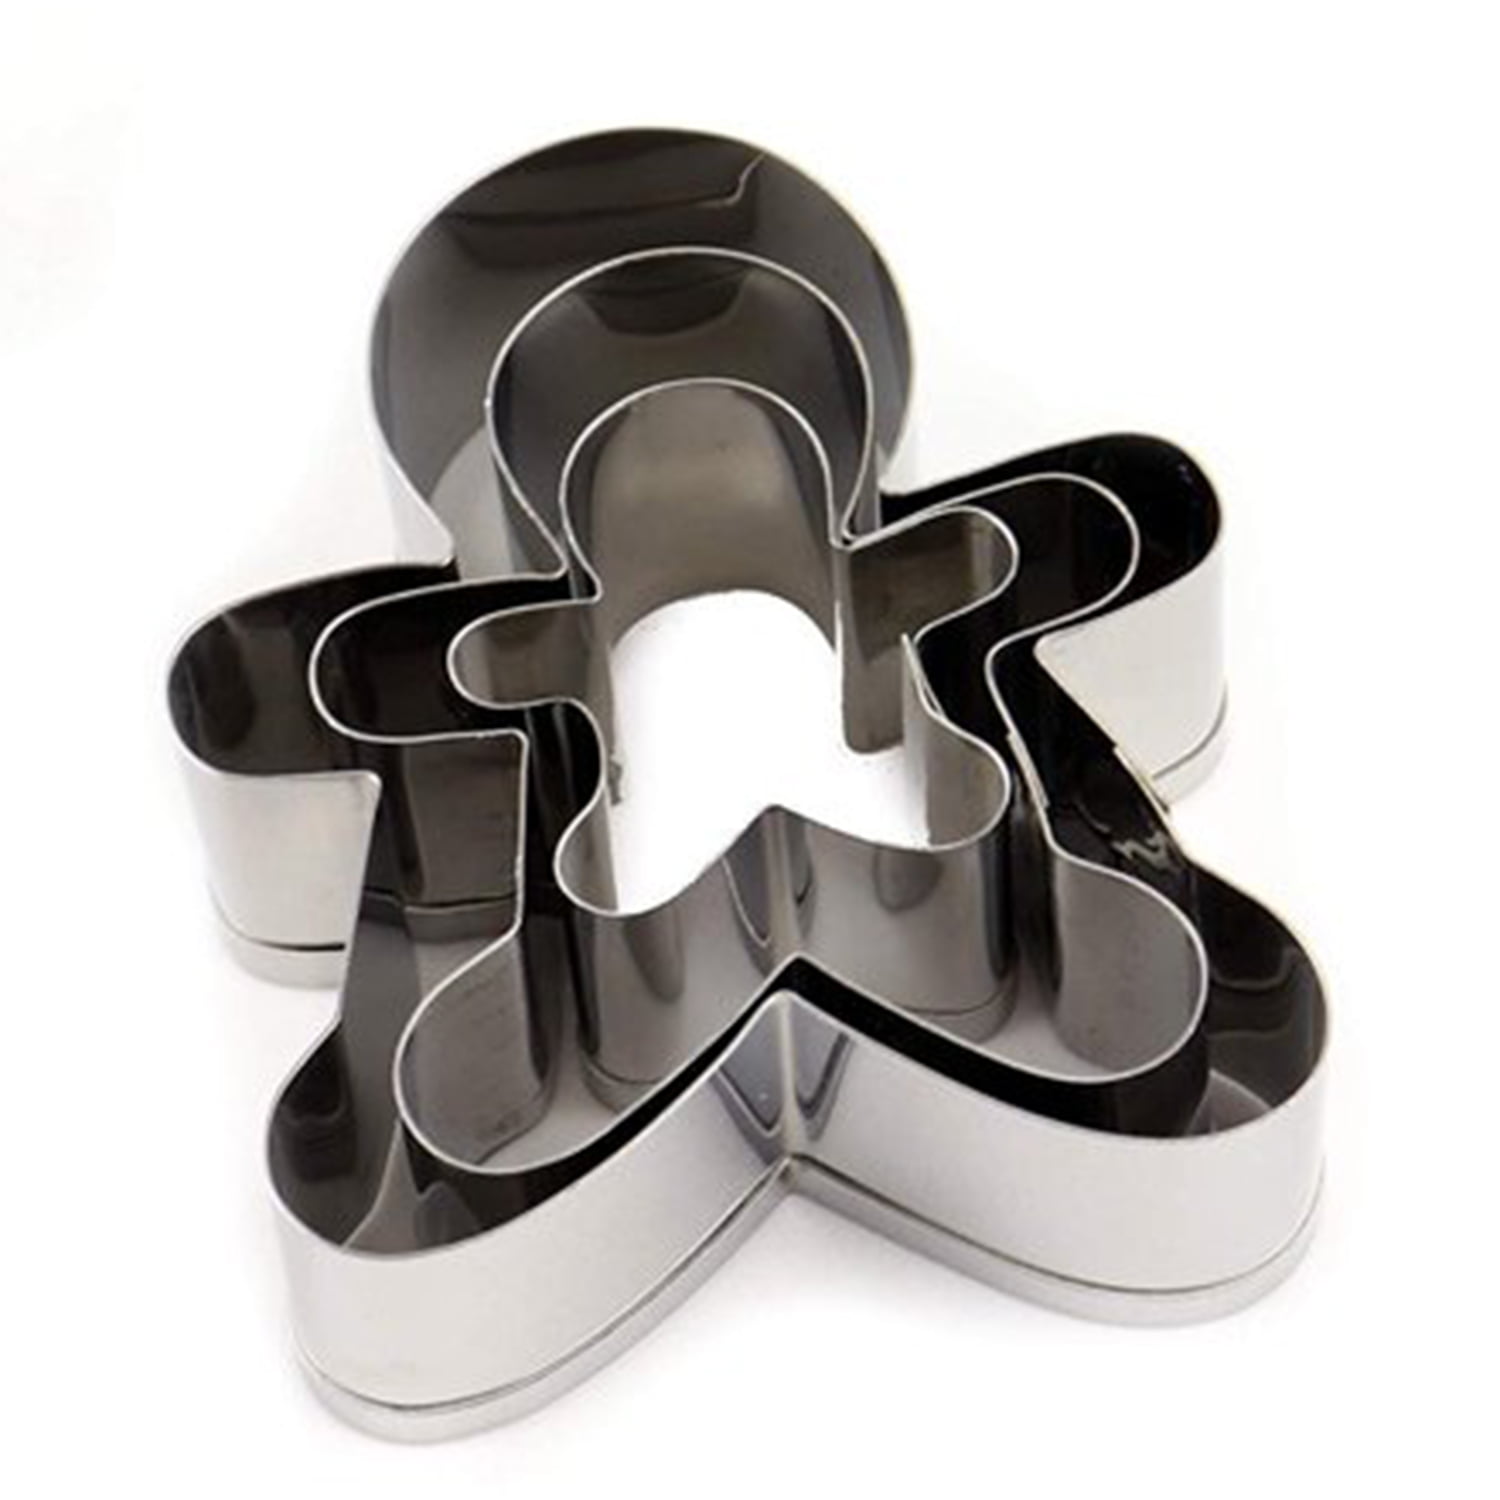 Pastry Cutters Stainless Steel TRIXES 3 Piece Ginger Bread Man Cookie Biscuit 